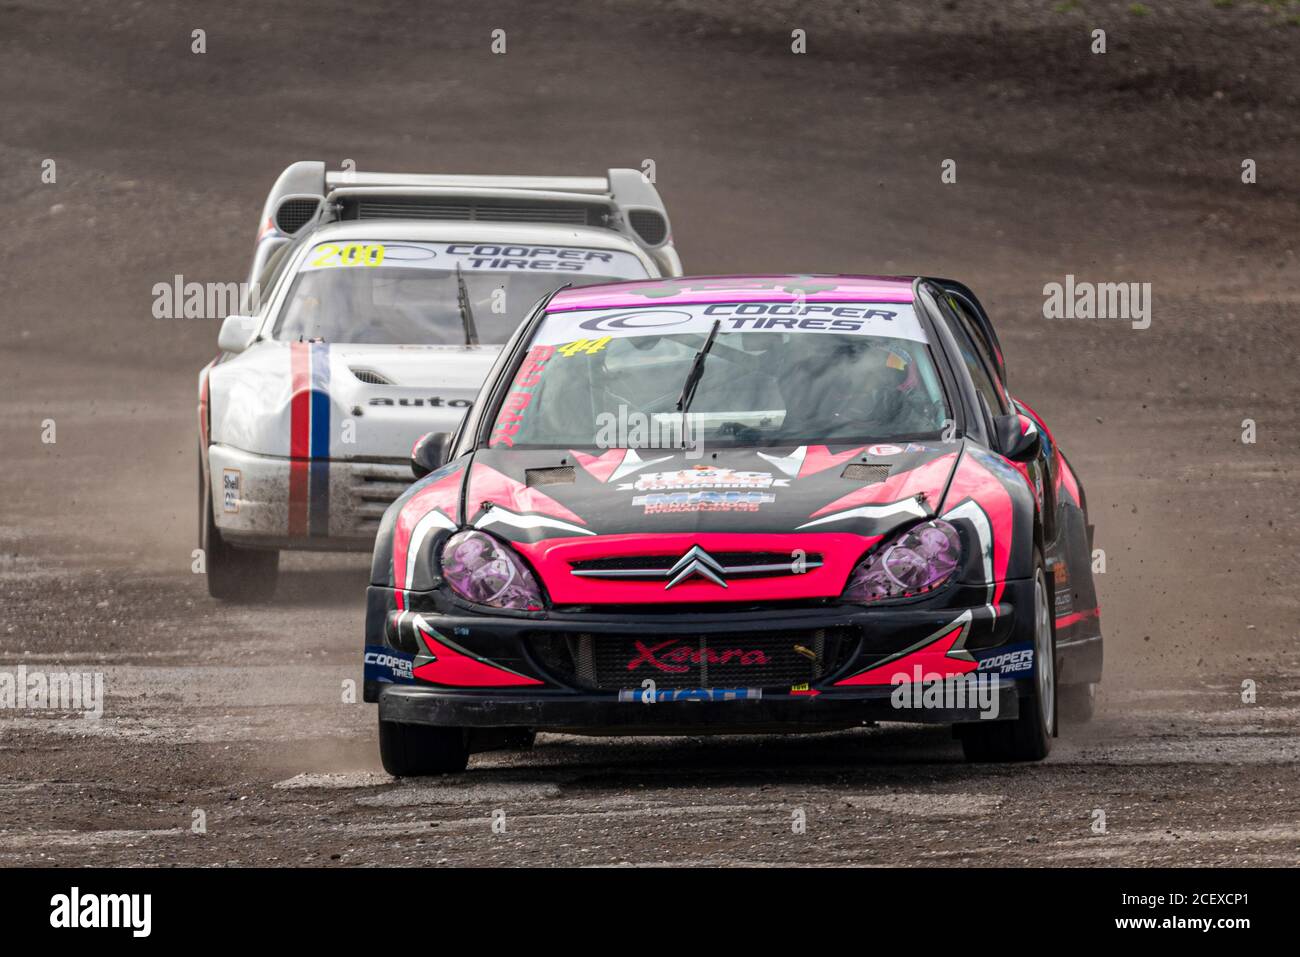 Mad Mark Watson in Citroen Xsara racing in the 4WD class at the 5 Nations British Rallycross event at Lydden Hill, Kent, UK. During COVID-19. Stock Photo